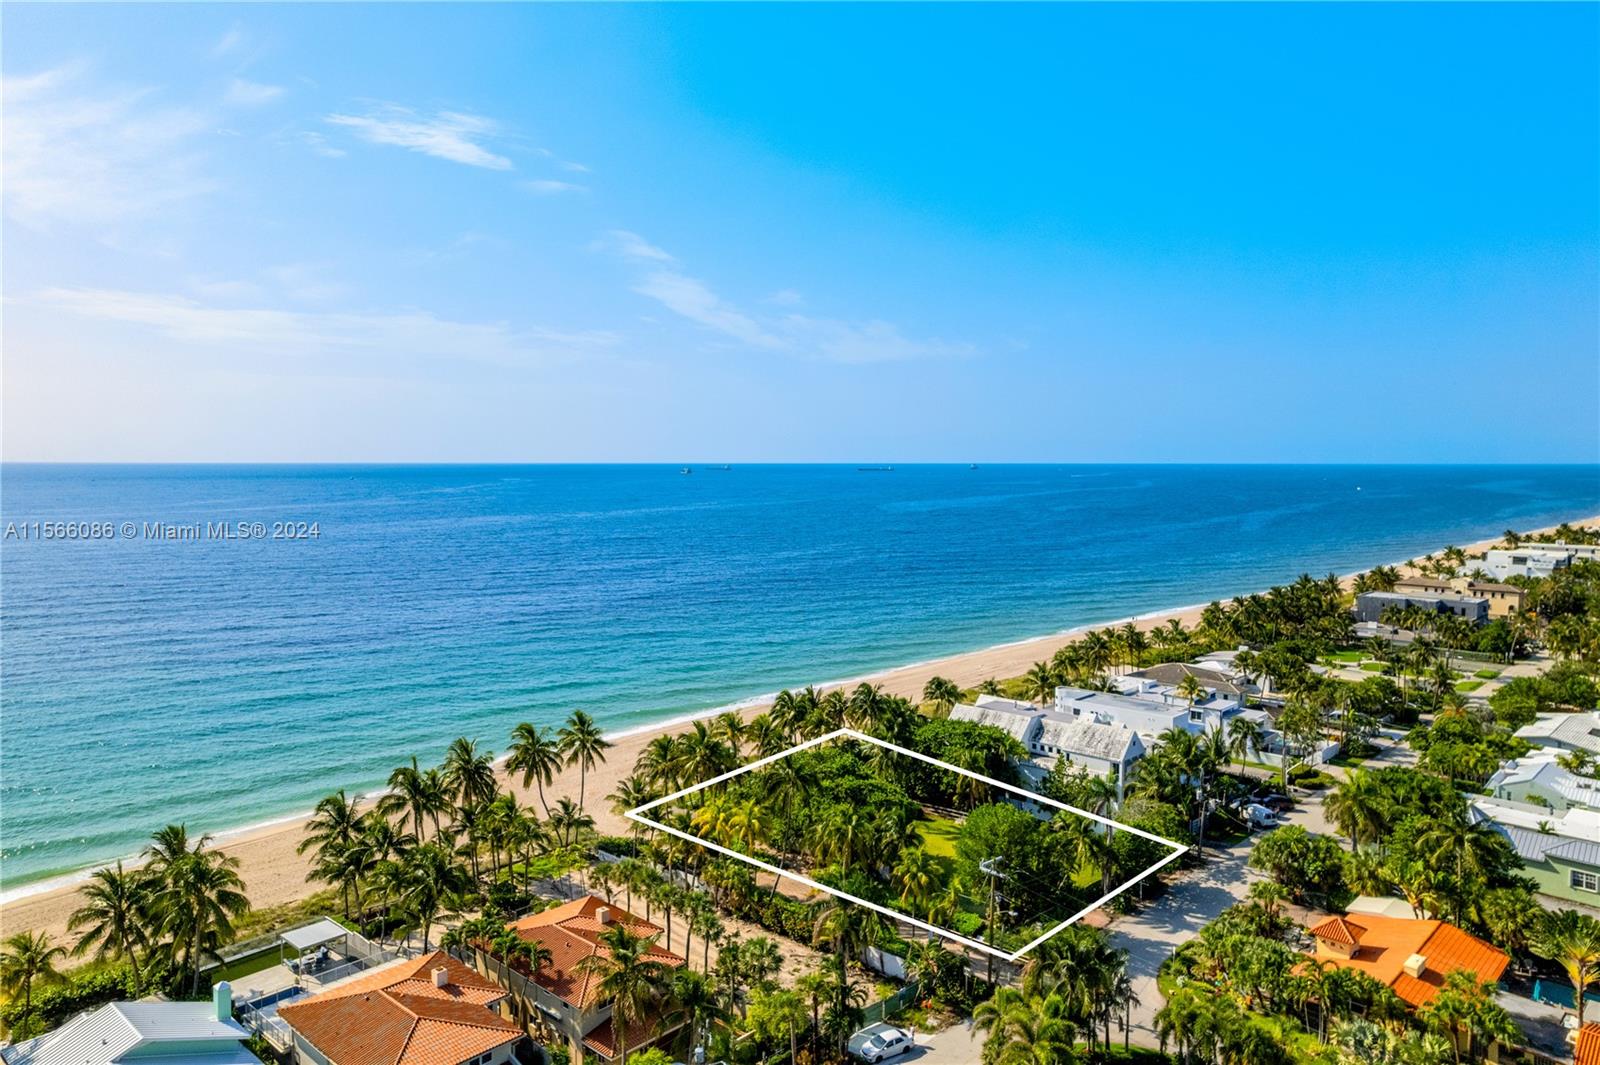 Experience the breathtaking beauty of this exceptional oceanfront property on Fort Lauderdale Beach. With 100
feet of direct beachfront access and nearly half an acre of land, it's the perfect opportunity to design your dream
home. This rare and valuable parcel is one of only 48 residences directly on the sand, offering a private and serene living experience. Enjoy the sparkling blue waters of the Atlantic Ocean and take advantage of the prime location near international airports, top-rated restaurants, luxurious resorts, prestigious country clubs, and an exclusive yacht club. Seize the chance to craft your dream home in a setting that epitomizes coastal luxury. This private
oceanfront estate is waiting to be transformed into your personal sanctuary.